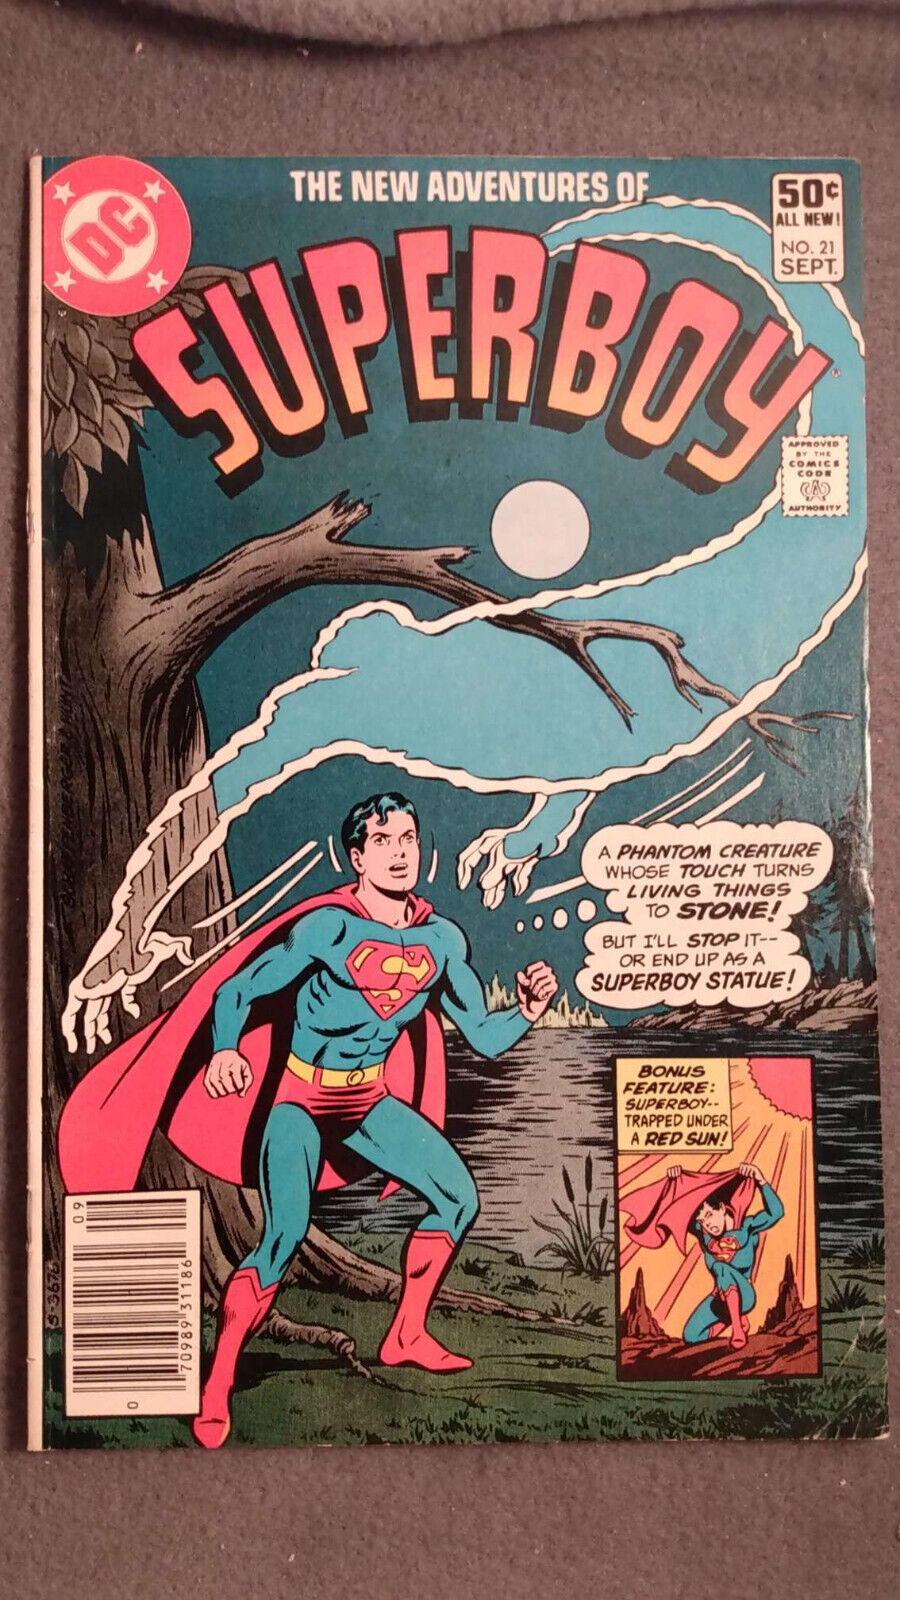 New Adventures of Superboy #21 (1981) VG-FN DC Comics $4 Flat Rate Comb Shipping